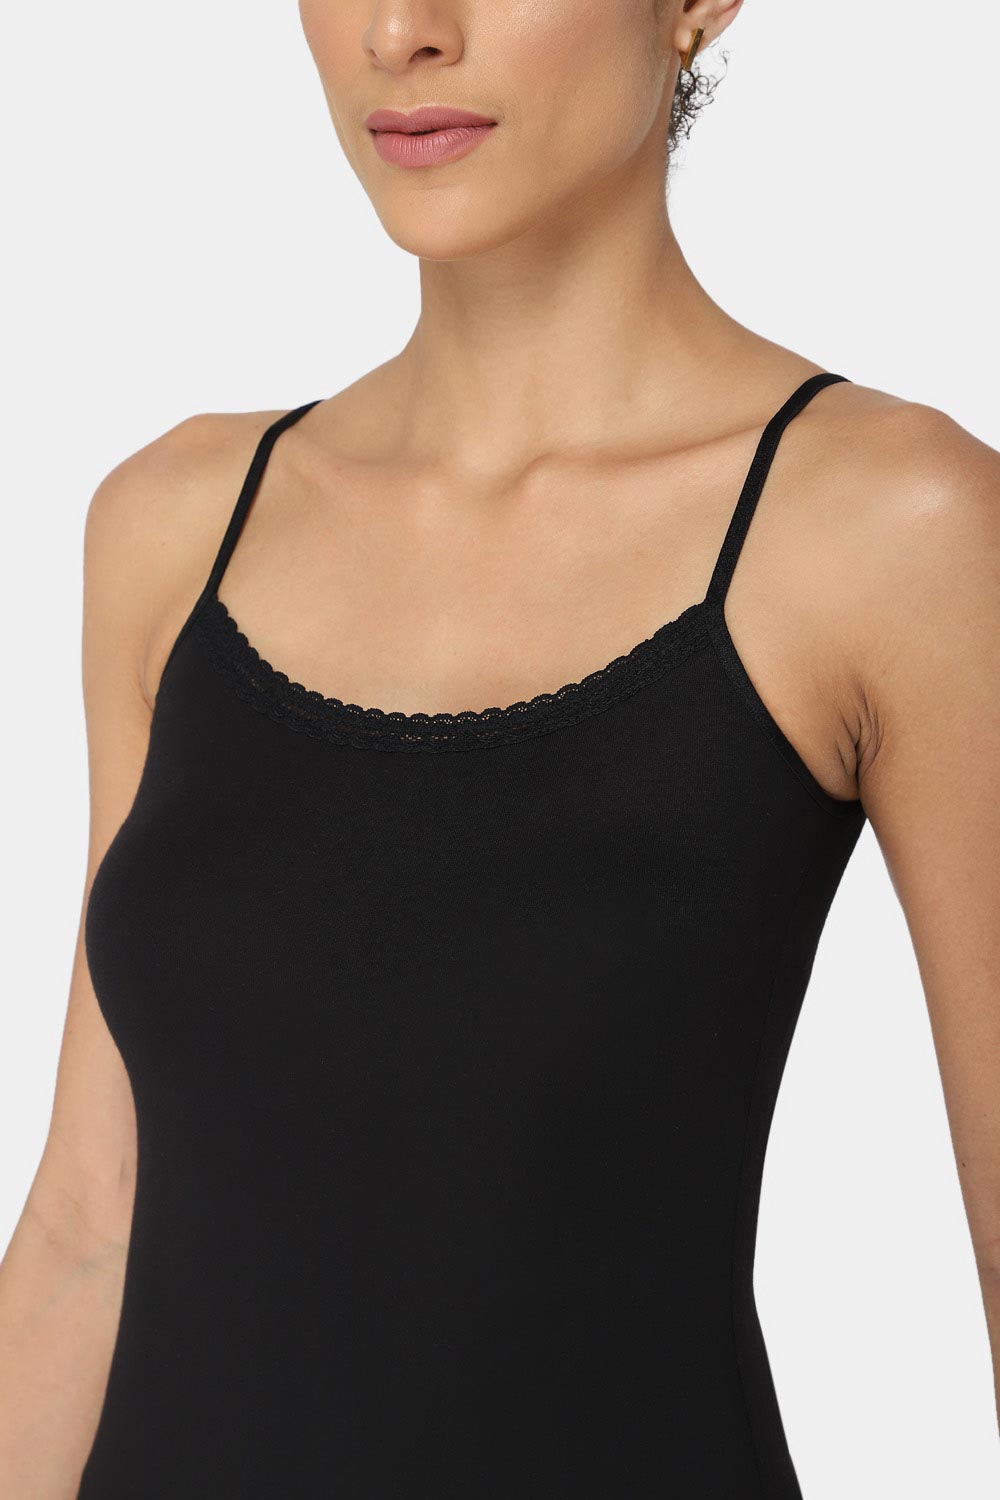 Intimacy Super Stretch Camisole Special Combo Pack - M001 - Pack of 3 - C63